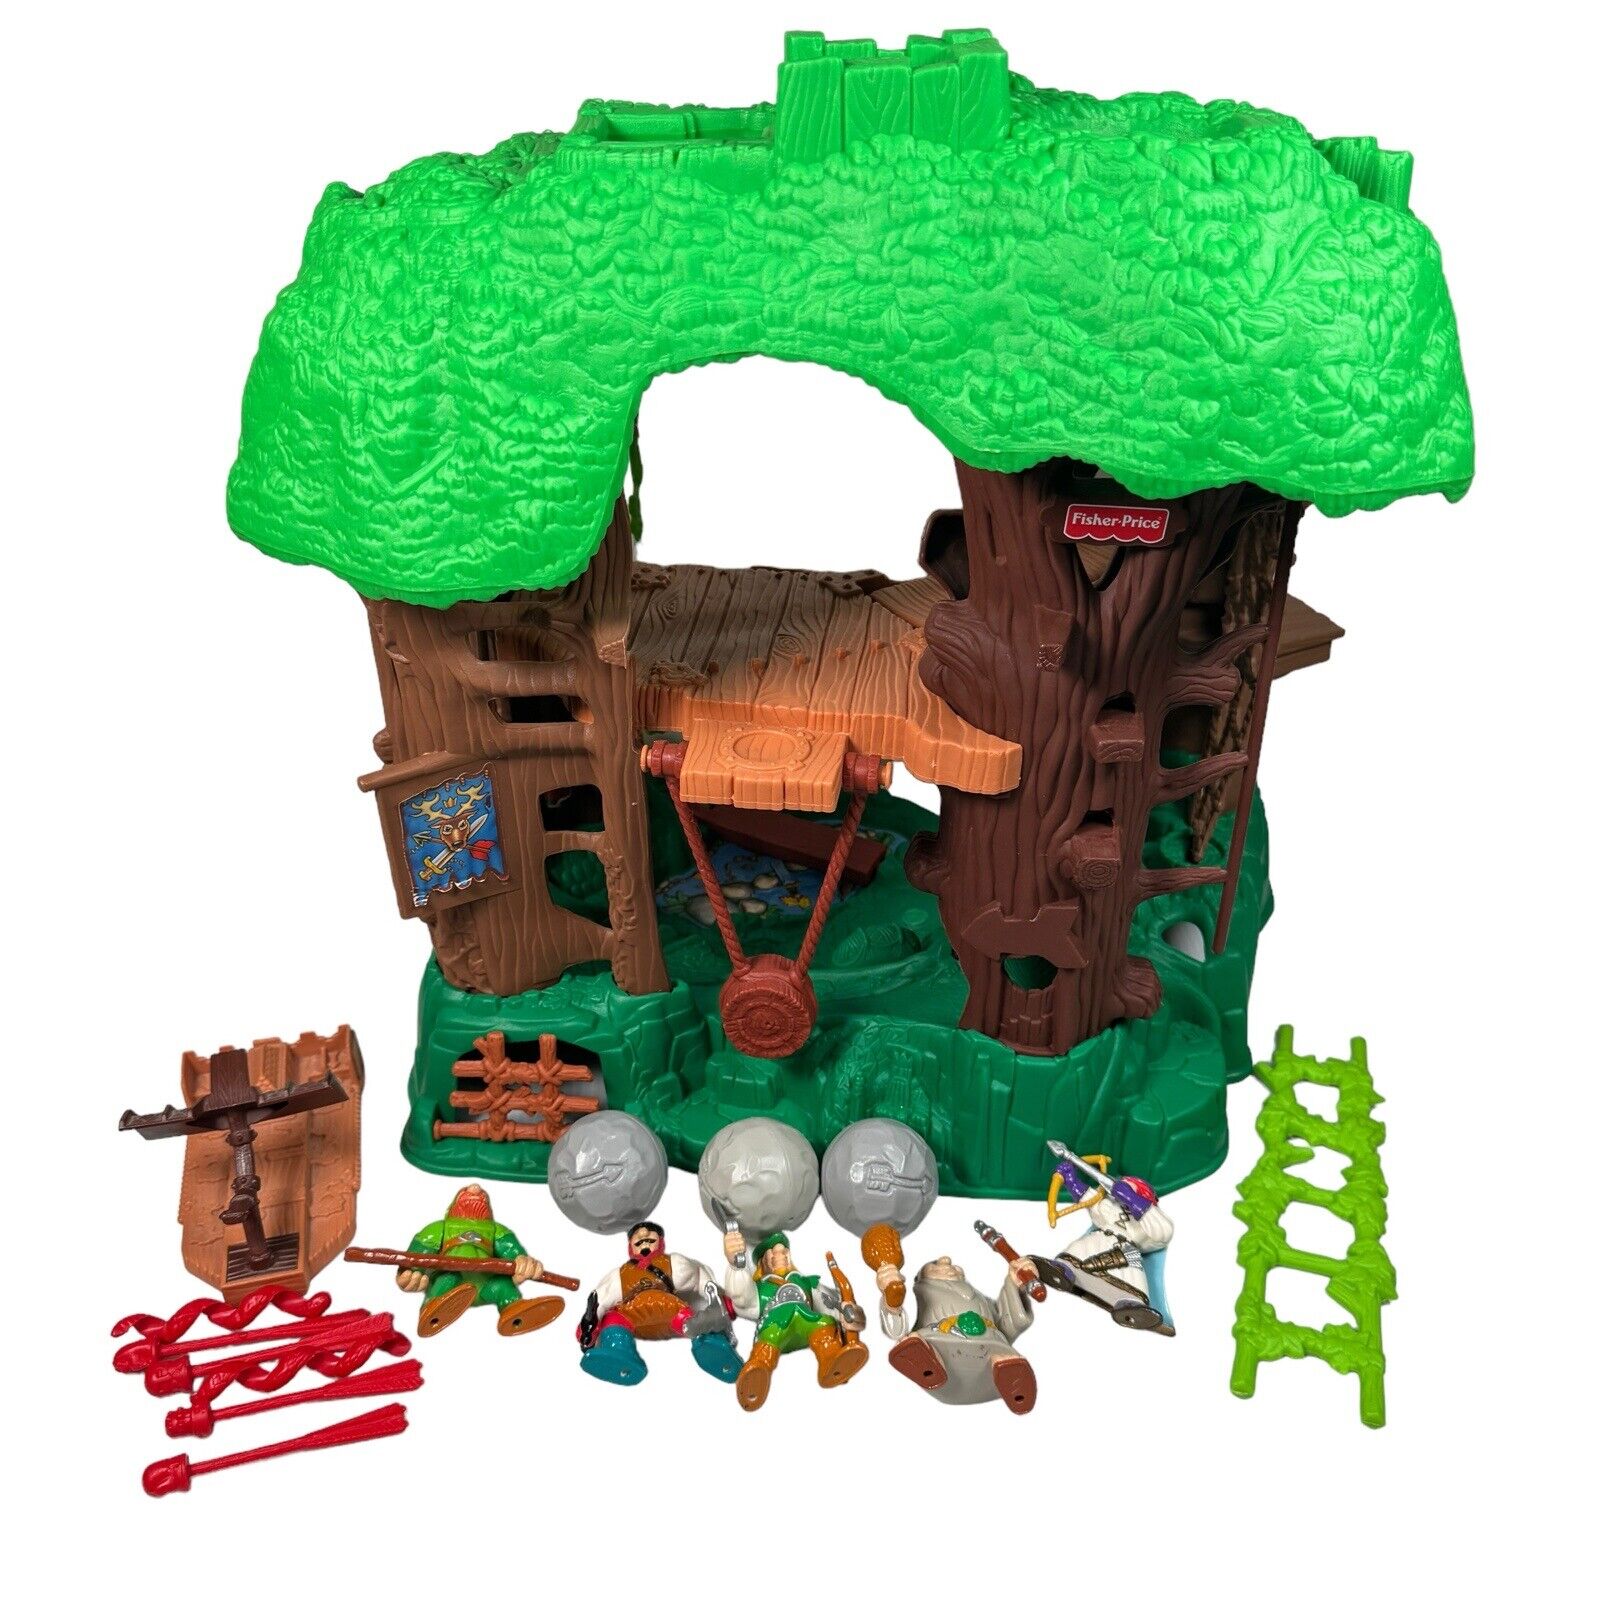 VINTAGE 1998 Fisher Price GREAT ADVENTURES ROBIN HOOD\'S FOREST Playset Complete